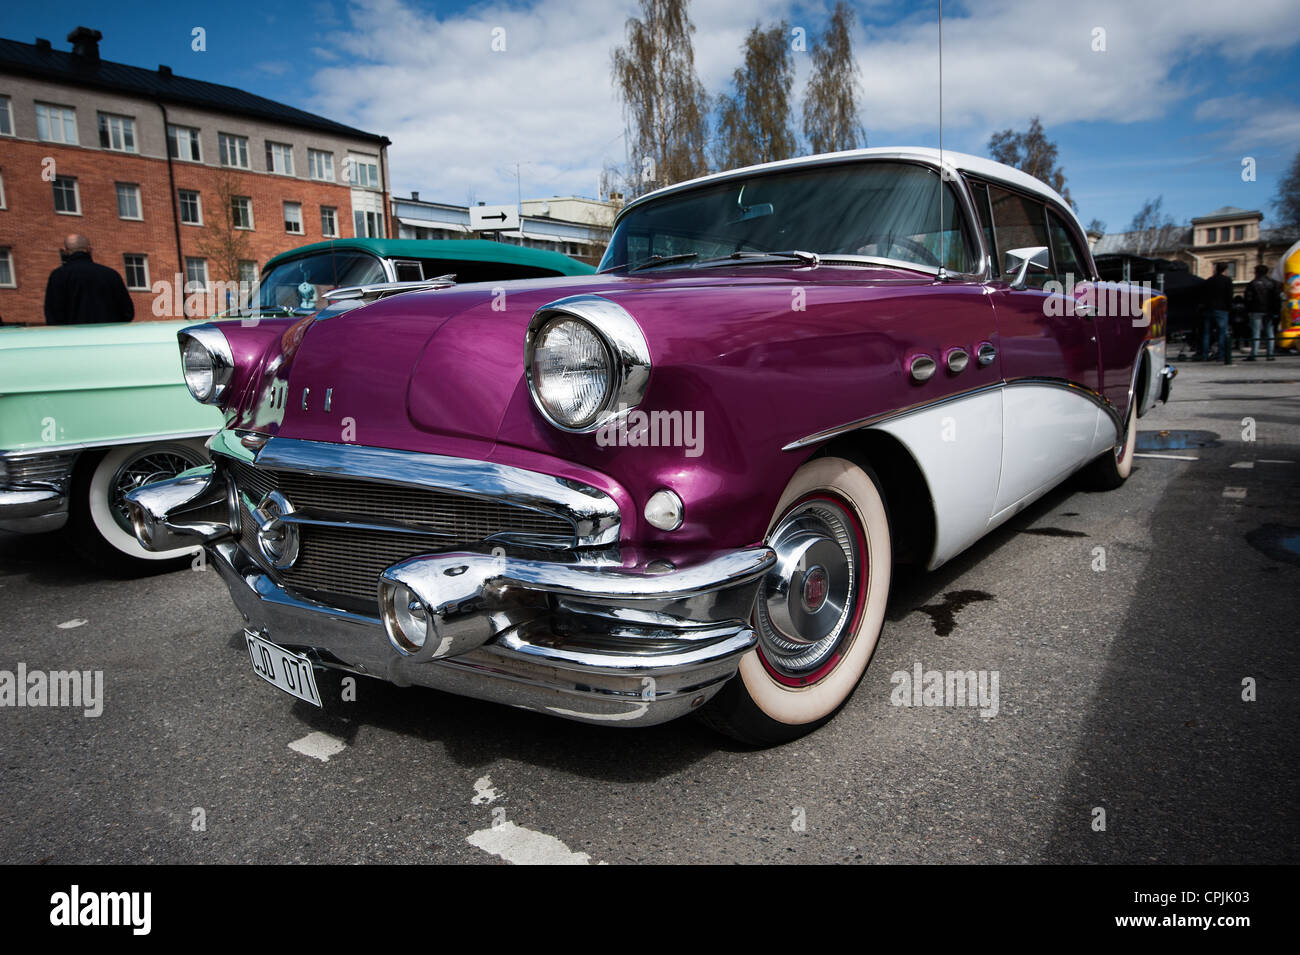 UMEA, SWEDEN - MAY 19: Classic car exhibition at the festival Kulturnatta on May 19, 2012 in Umea, Sweden. Stock Photo